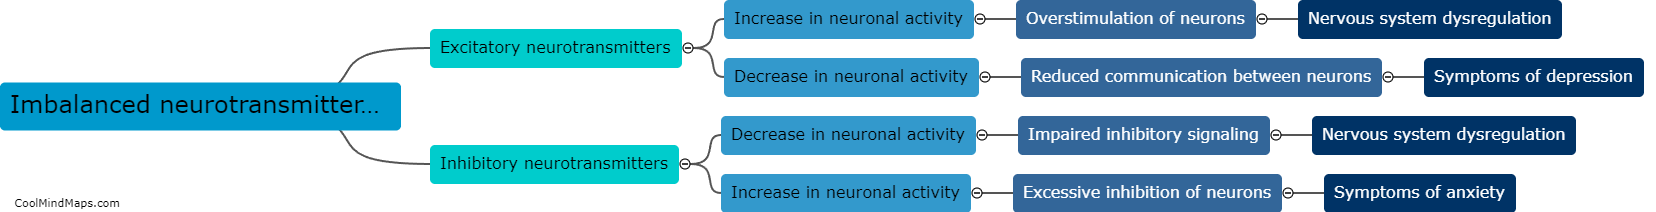 What happens when neurotransmitter levels are imbalanced?